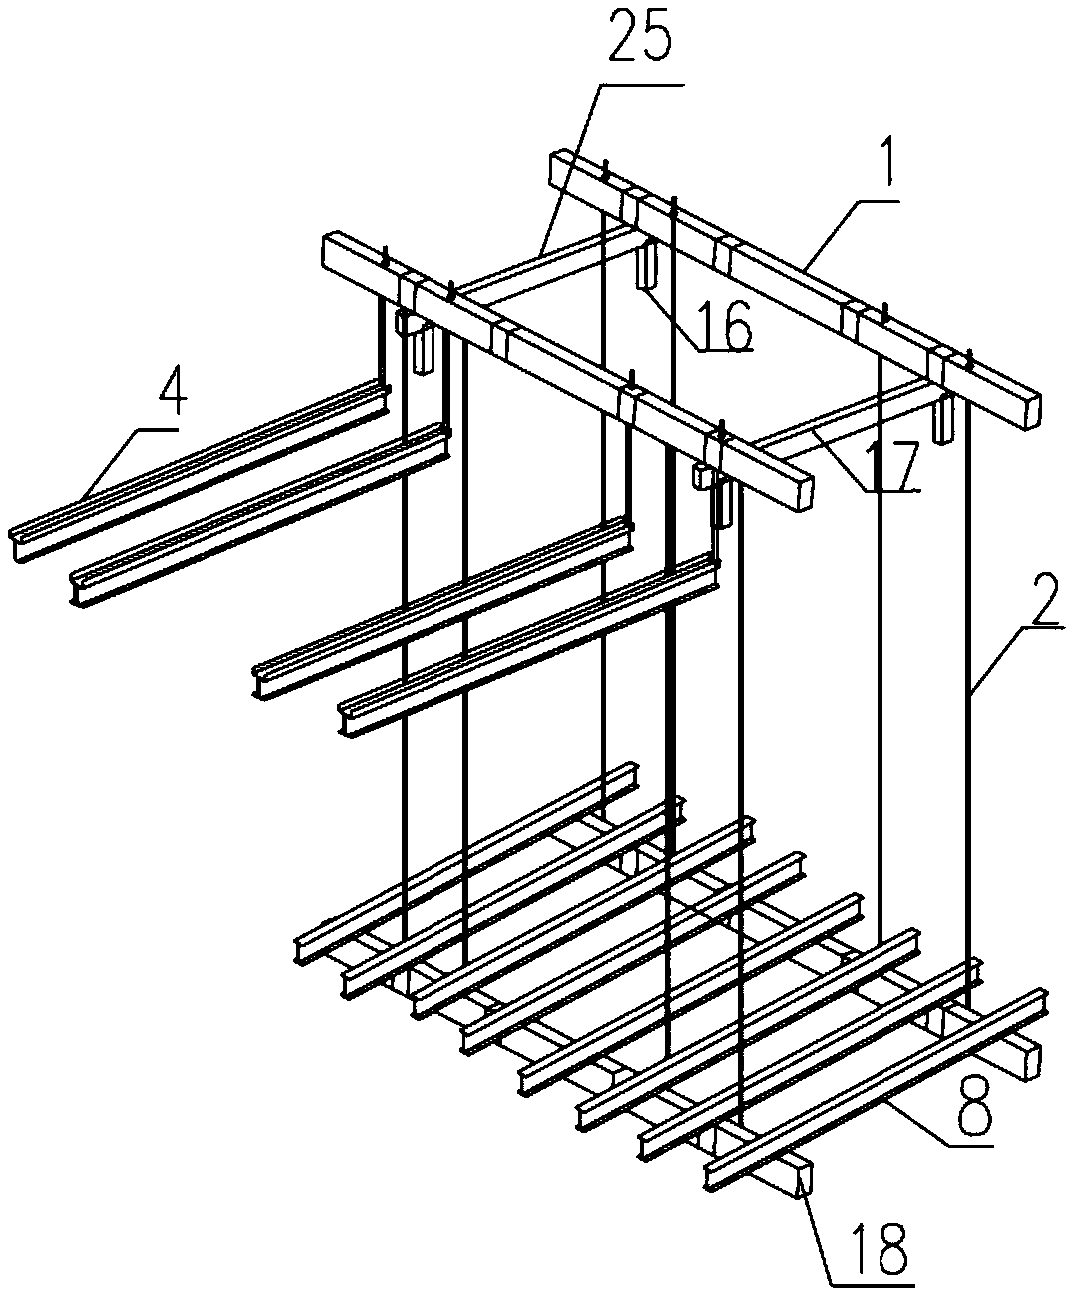 Hanging basket for corrugated steel web plate construction and construction process